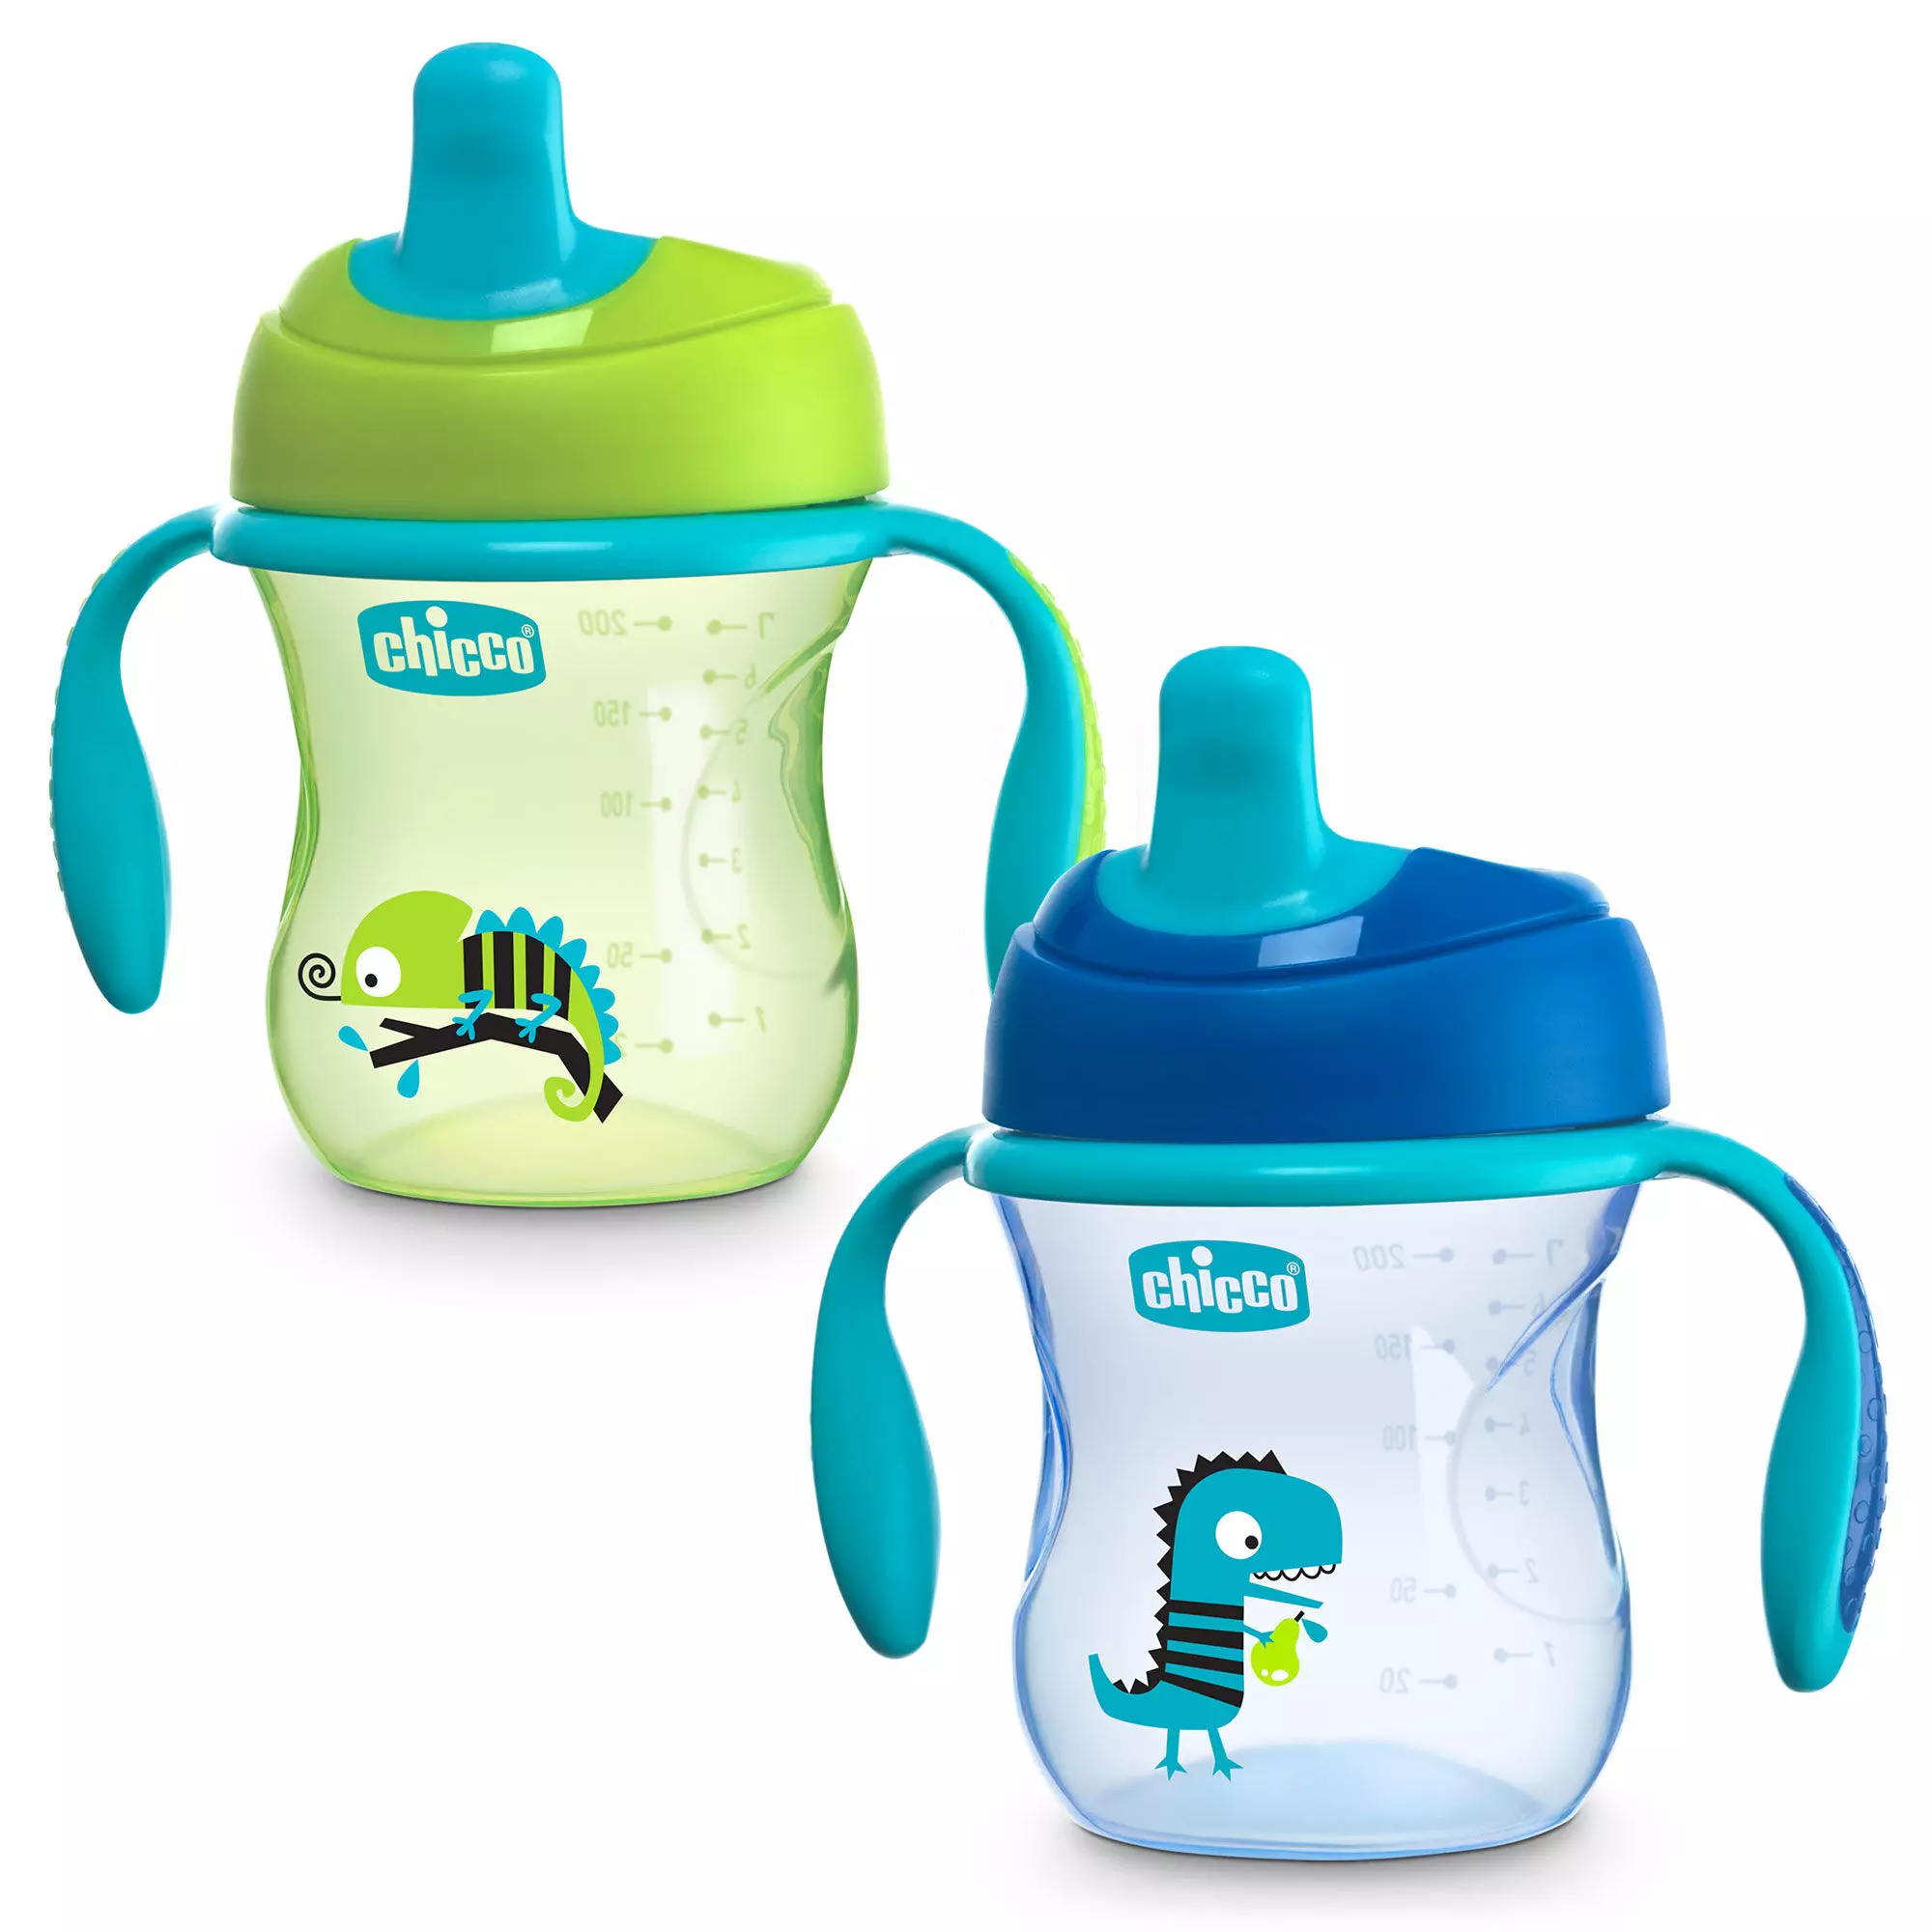 https://www.momjunction.com/wp-content/uploads/product-images/chicco-semi-soft-spout-spill-free-baby-trainer-sippy-cup_afl2486.jpg.webp